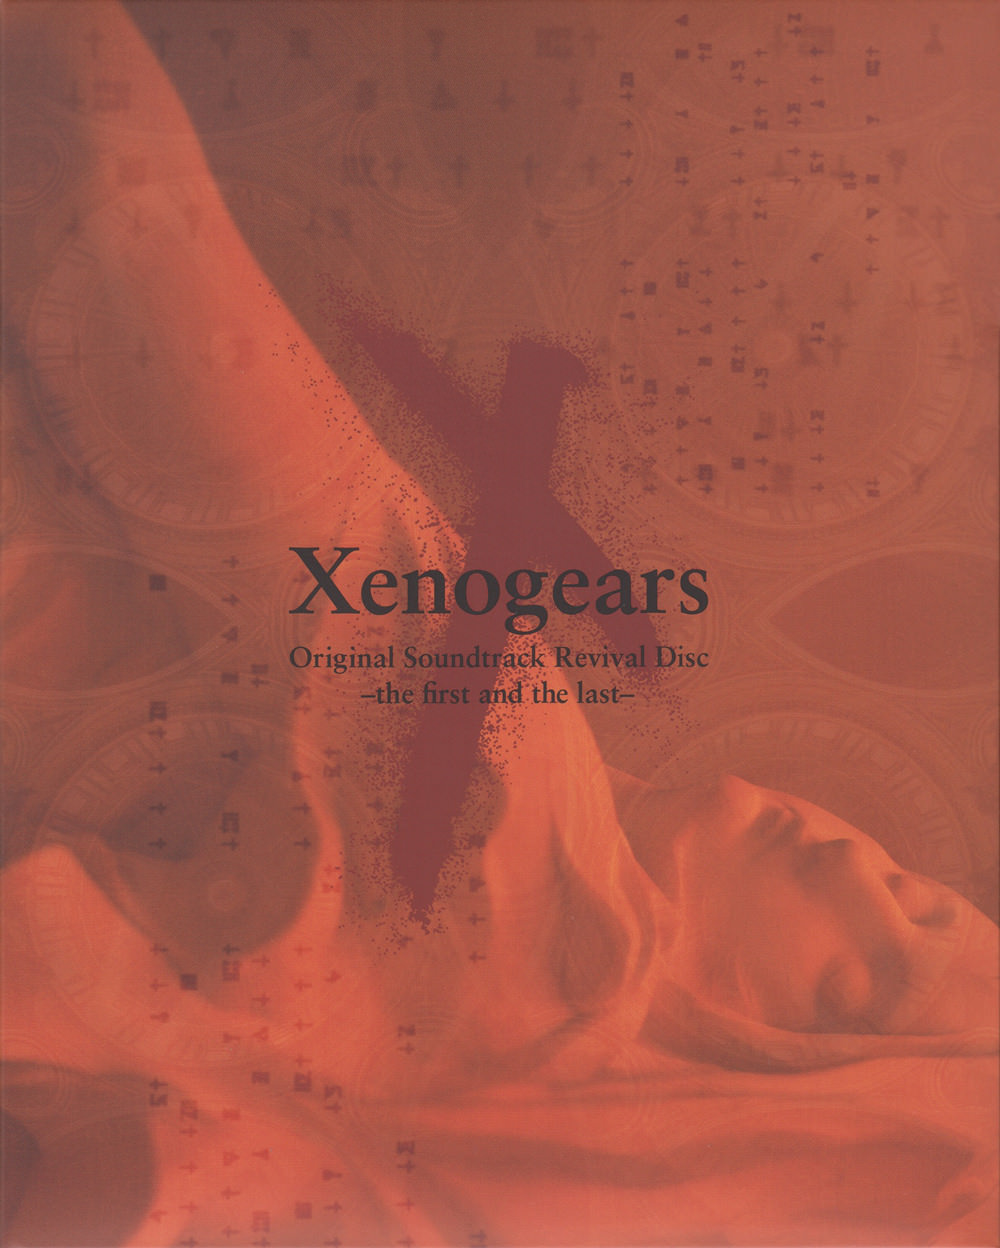 Xenogears Original Soundtrack Revival Disc - the first and the 